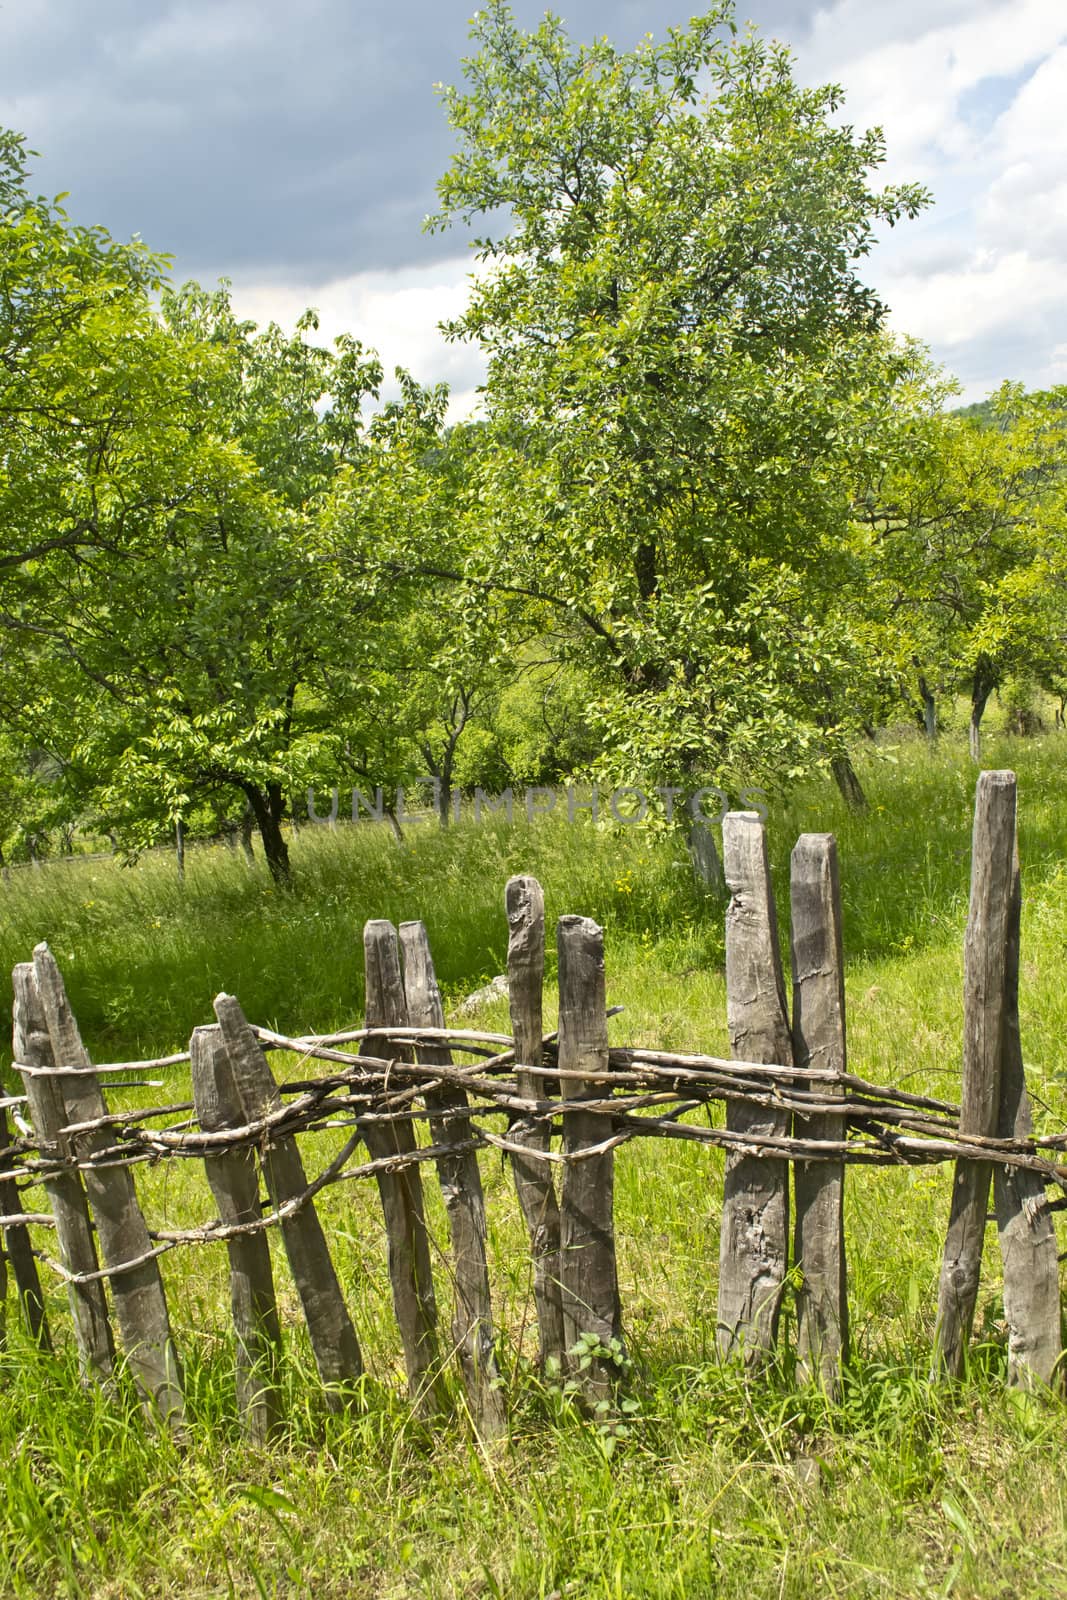 Old wooden fence in village with orchard behind by vician